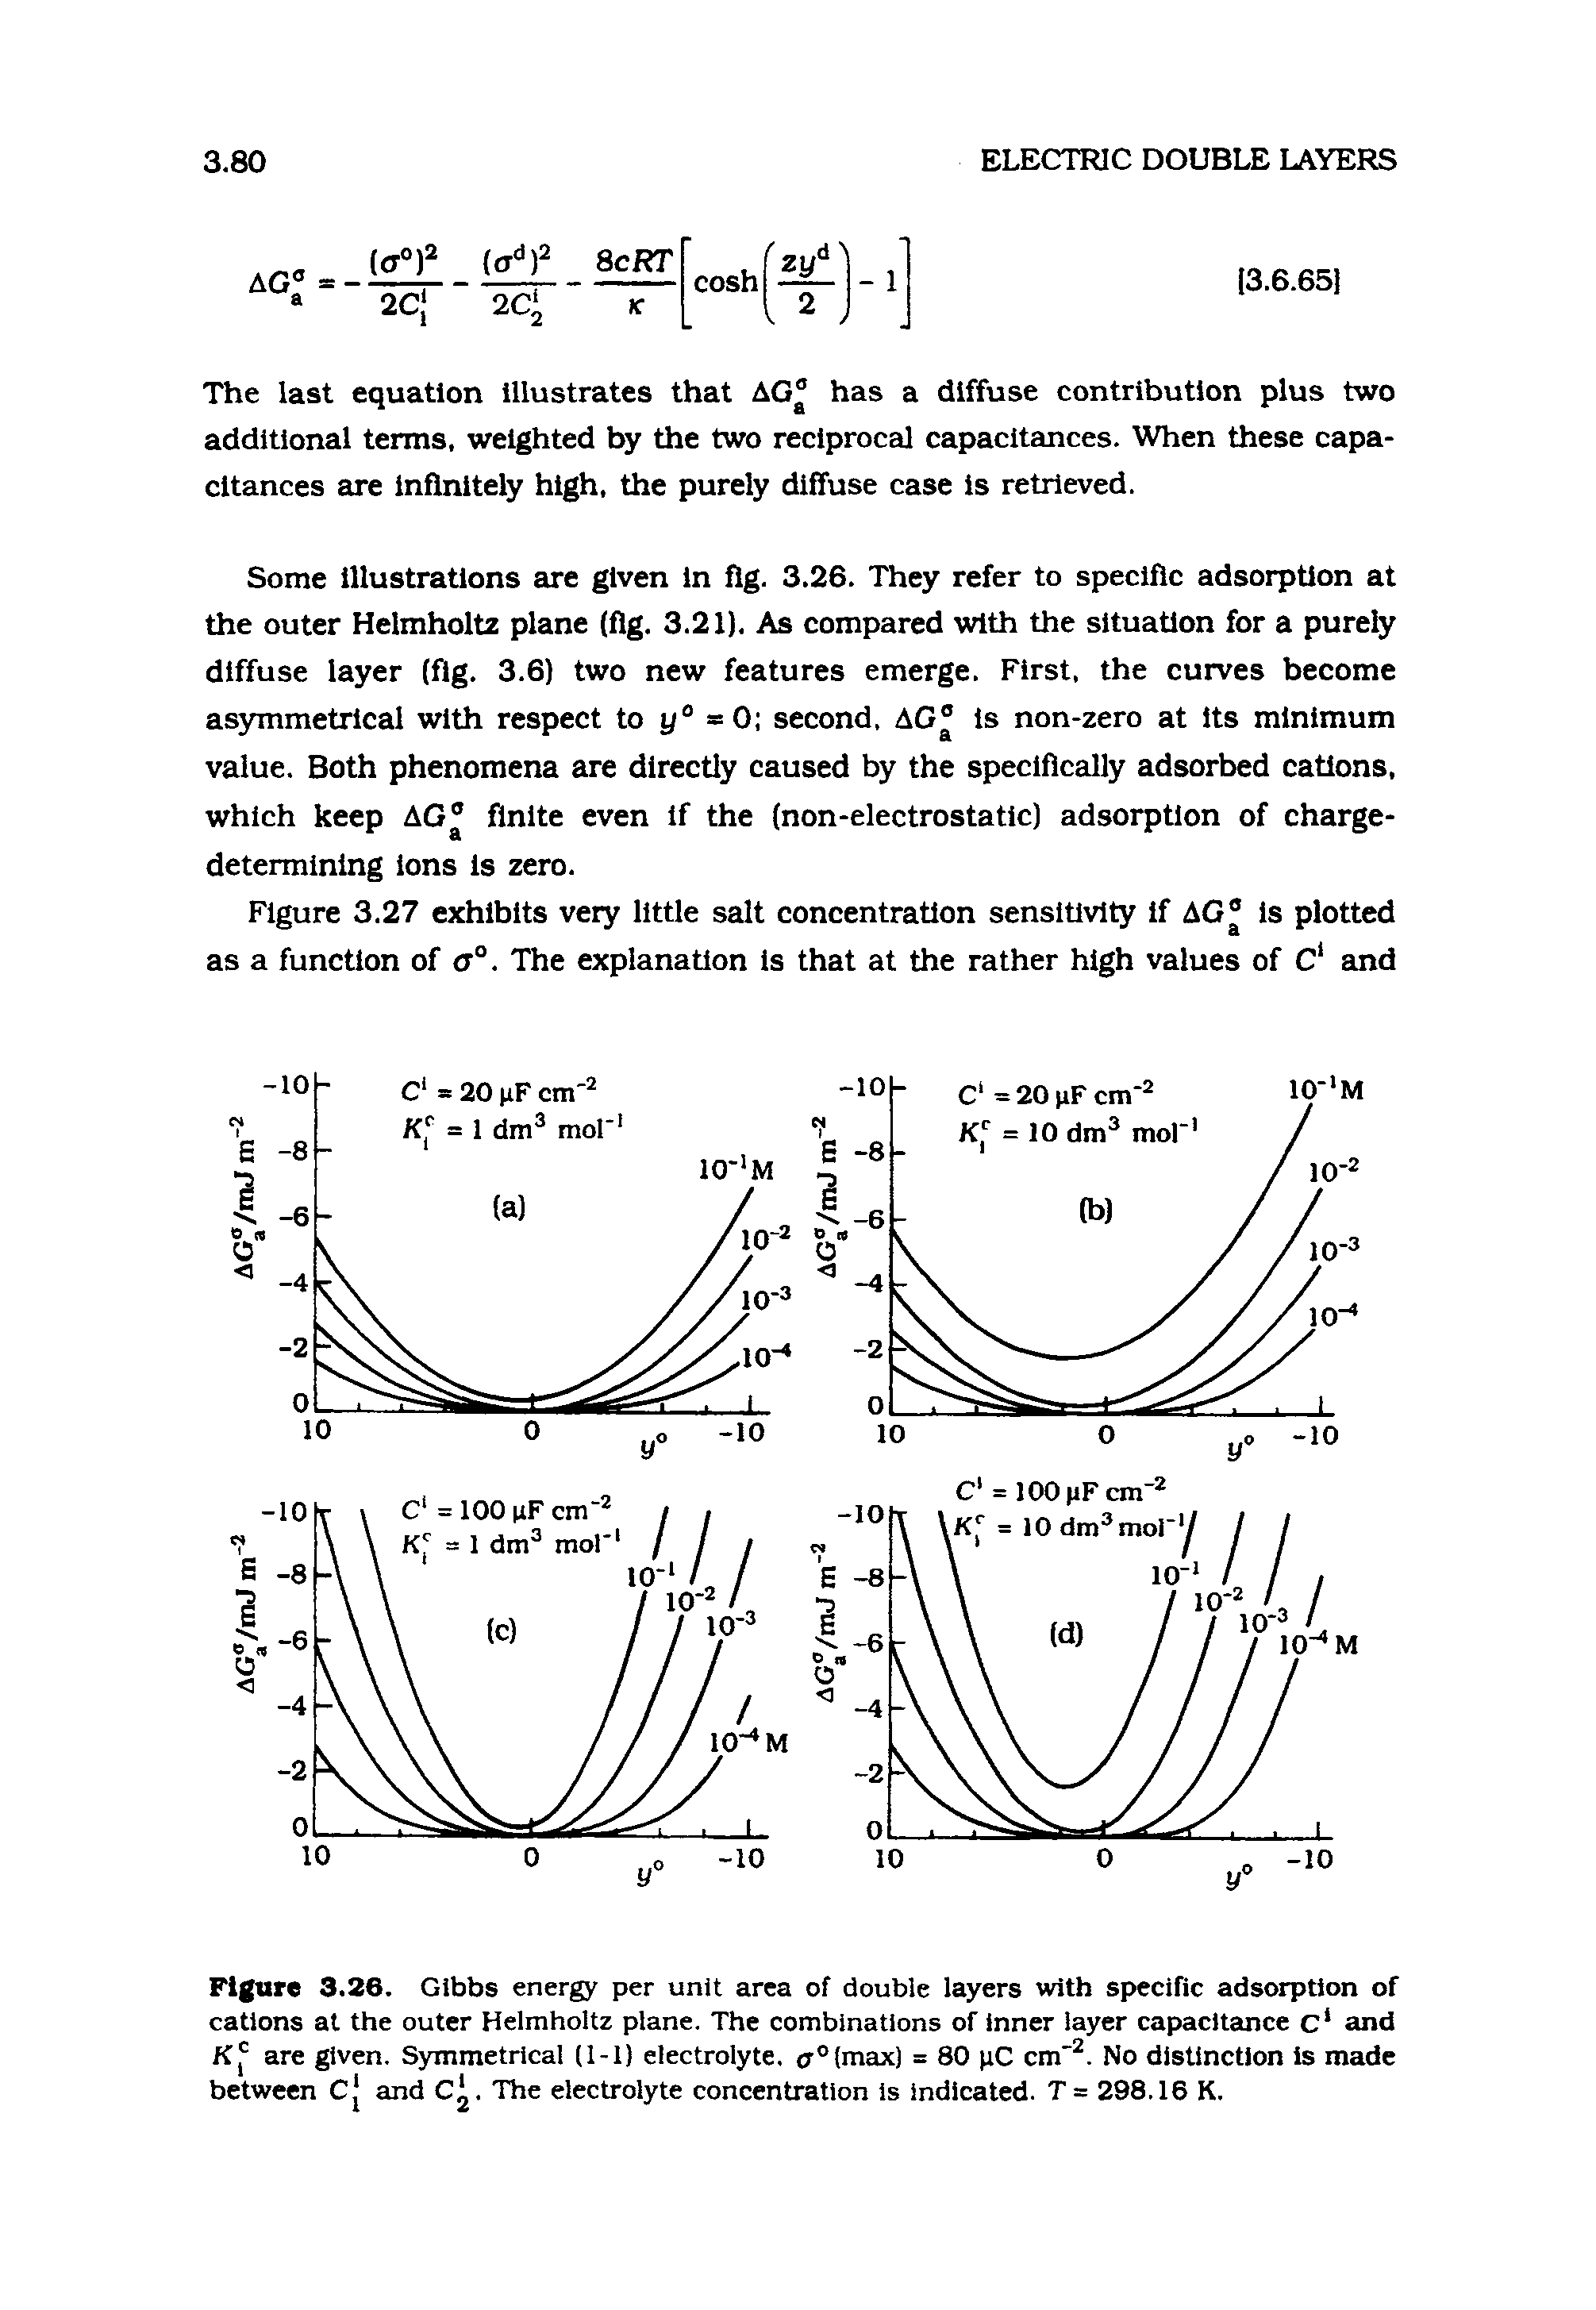 Figure 3.26. Gibbs energy per unit area of double layers with specific adsorption of cations at the outer Helmholtz plane. The combinations of inner layer capacitance c and K are given. Symmetrical (1-1) electrolyte. <T°(max) = 80 pC cm". No distinction is made between Cj and Cj. The electrolyte concentration is indicated. T= 298.16 K.